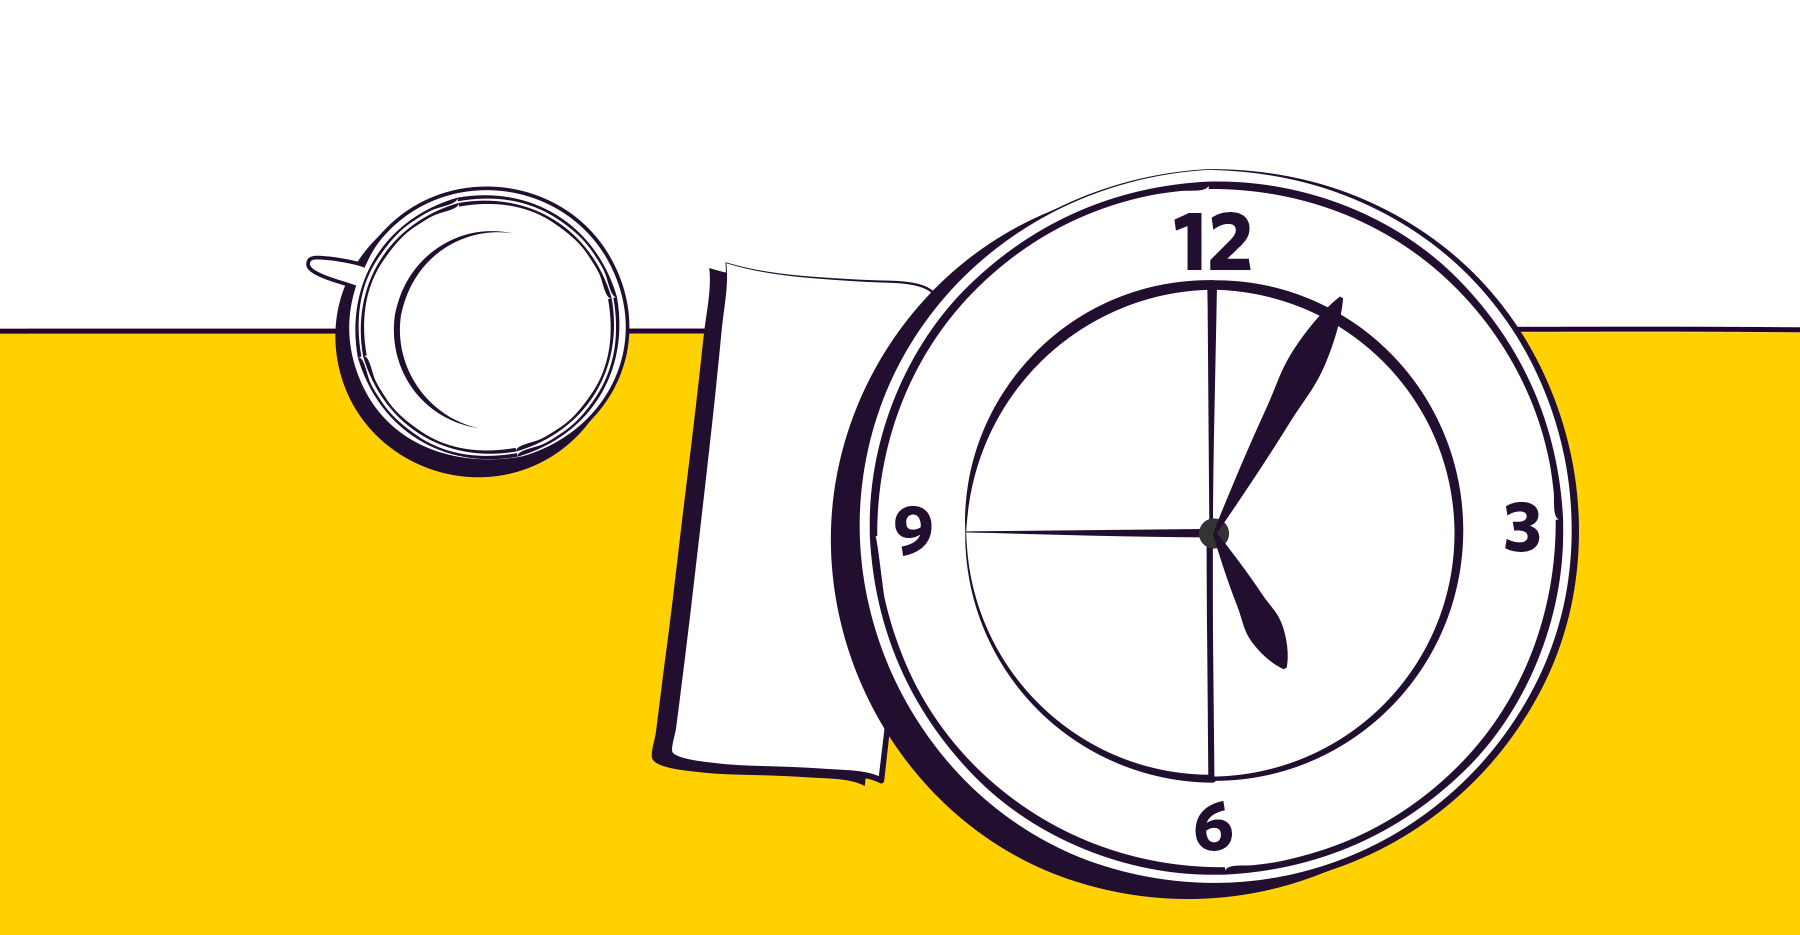 An illustration of a plate made of a clock on a yellow background